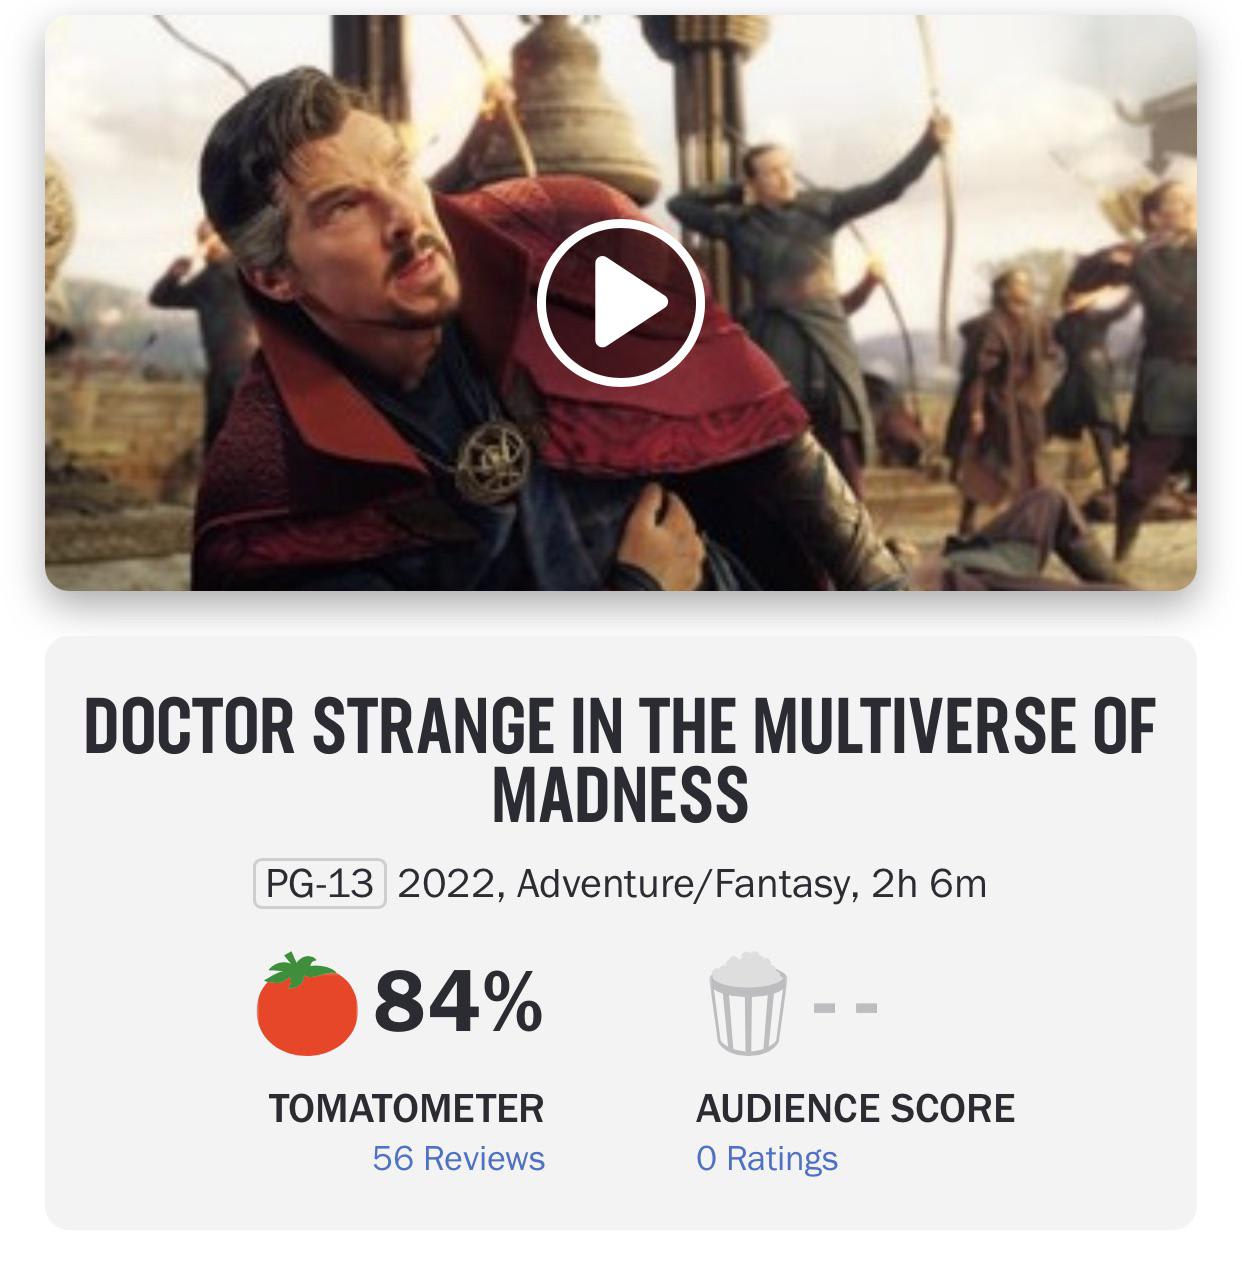 Doctor Strange in the Multiverse of Madness is currently fresh with 84% on Rotten Tomatoes!